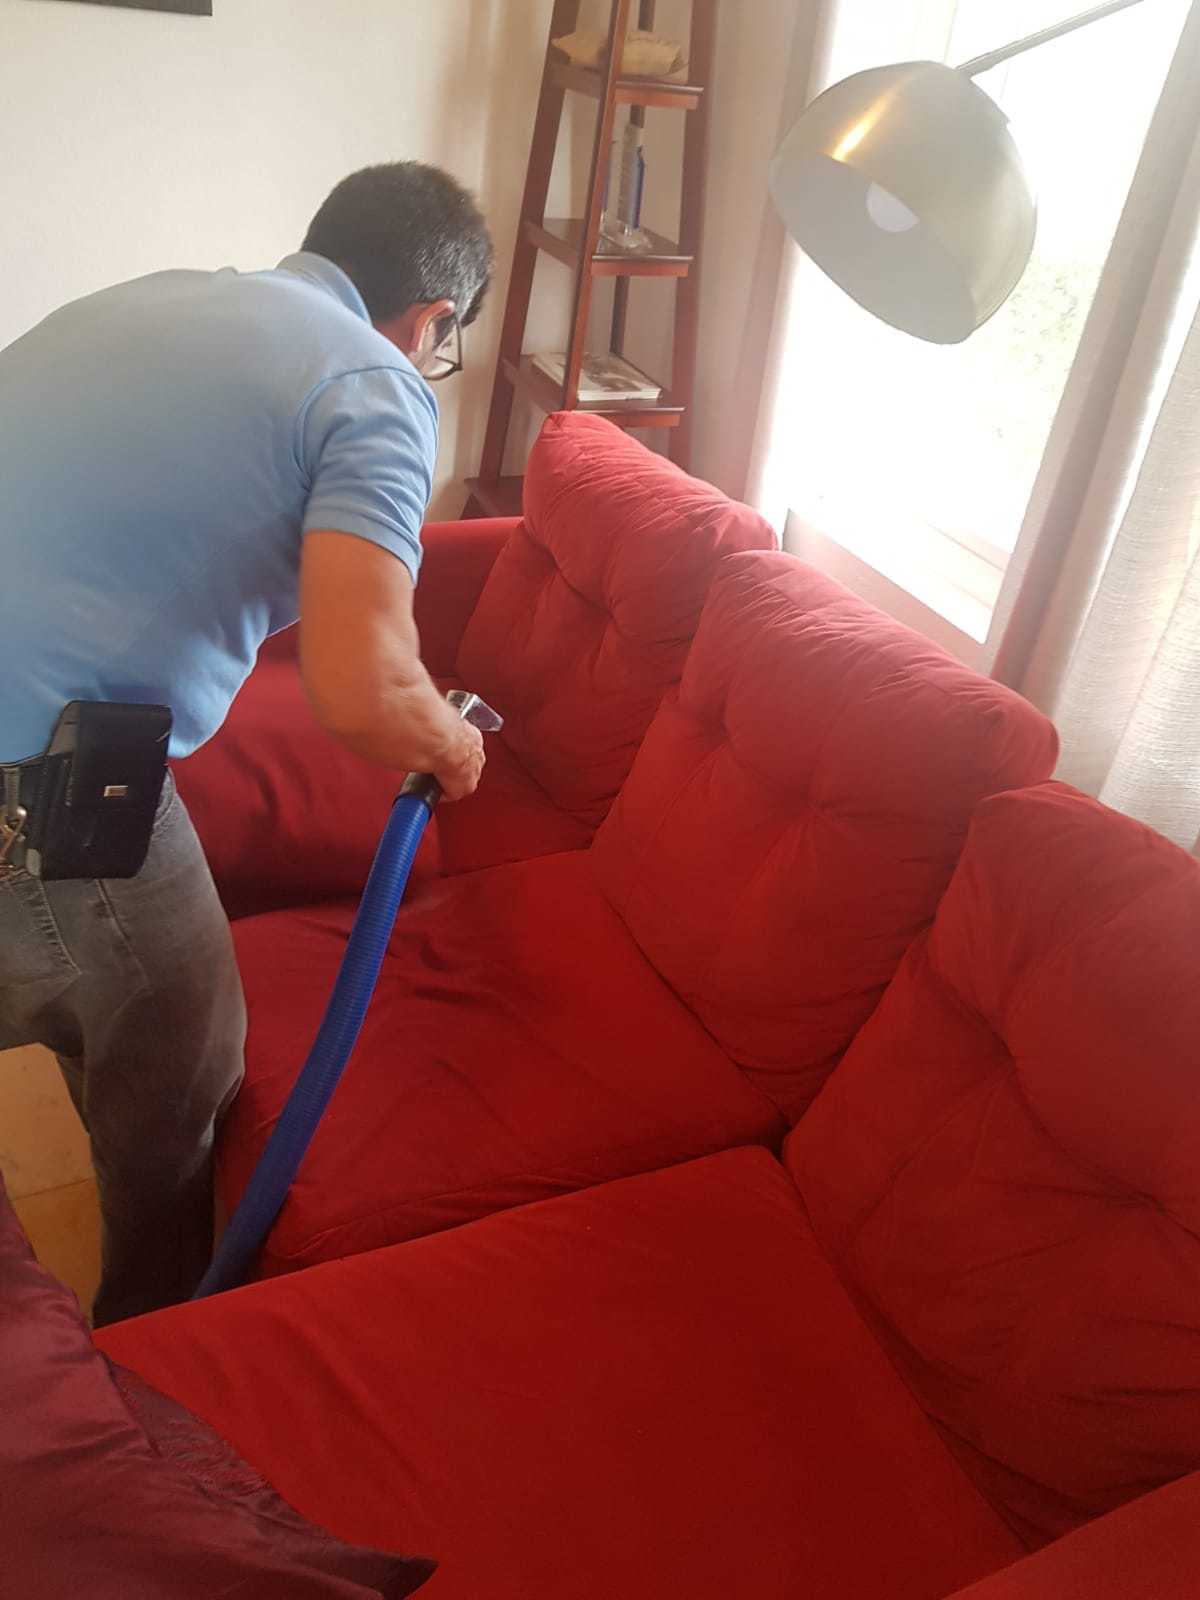 Assured Quality Cleaning